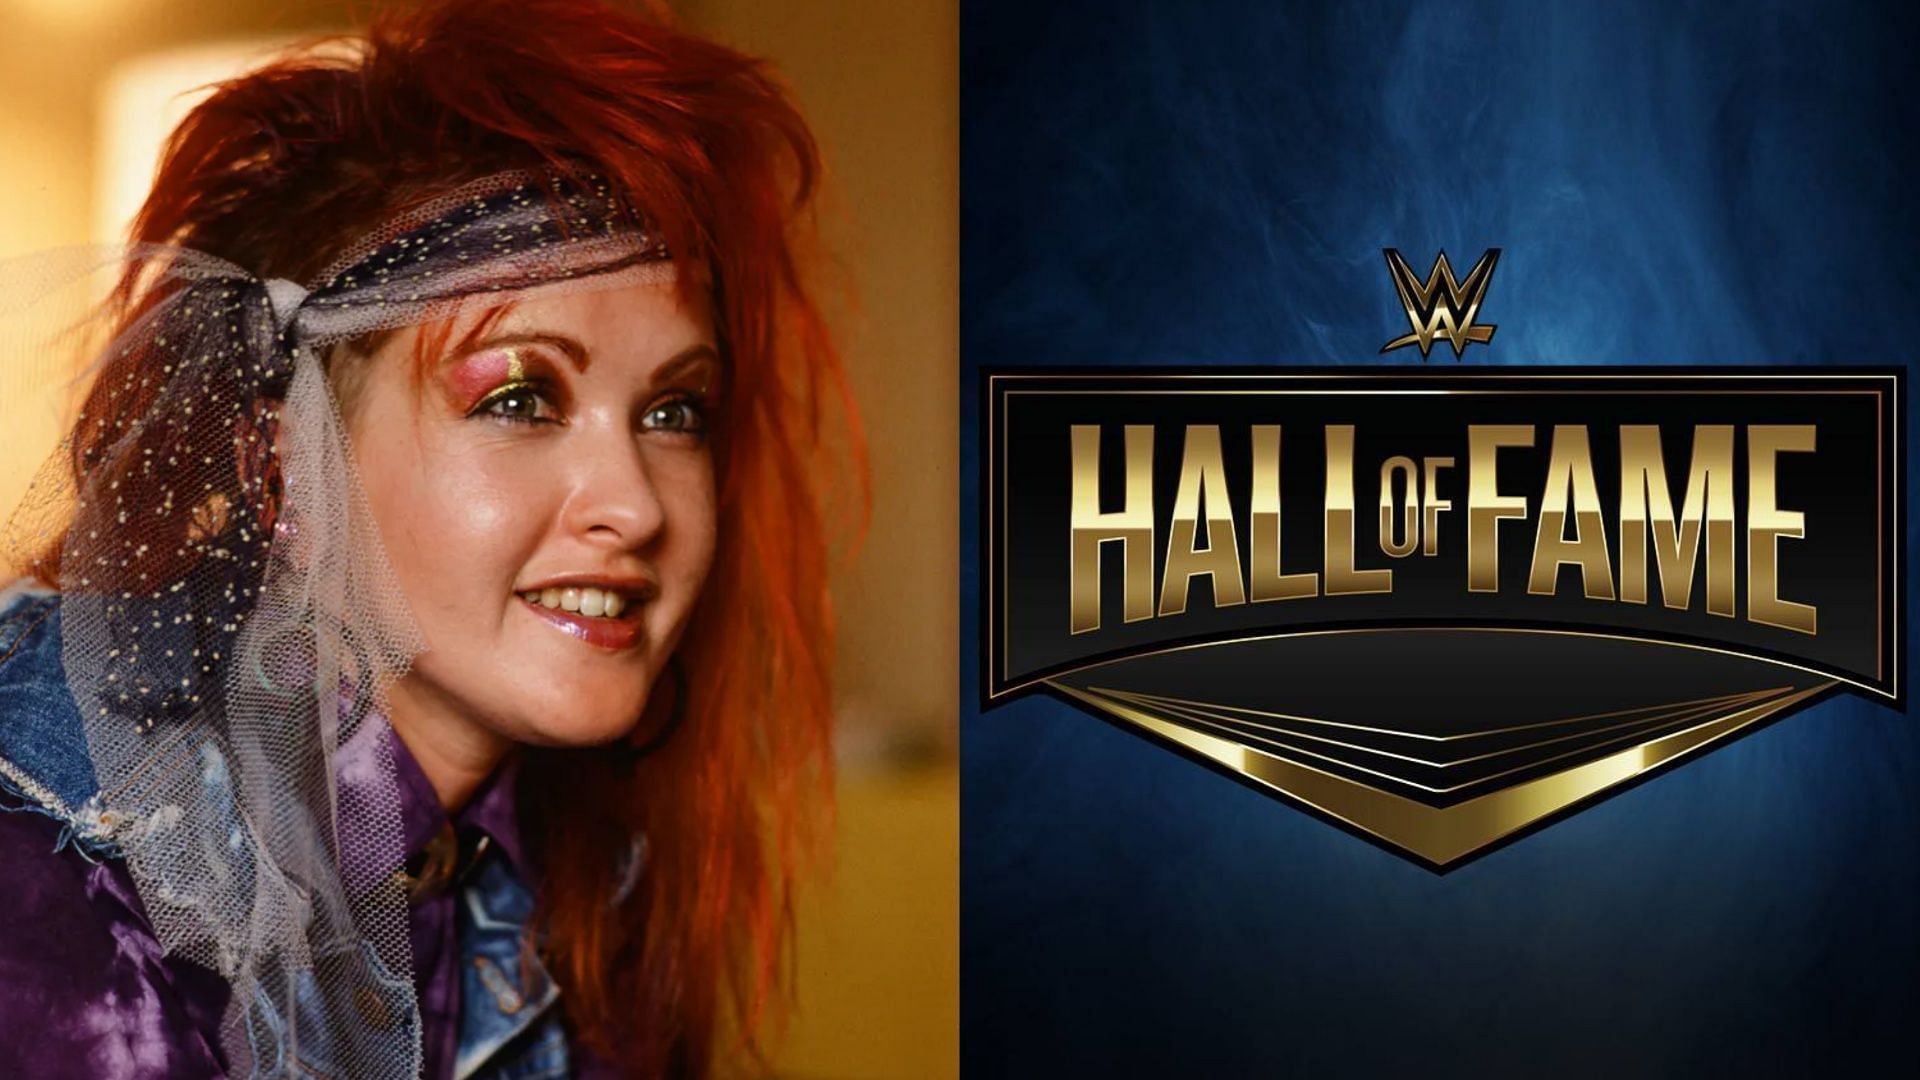 Cyndi Lauper is still not in the WWE Hall of Fame.